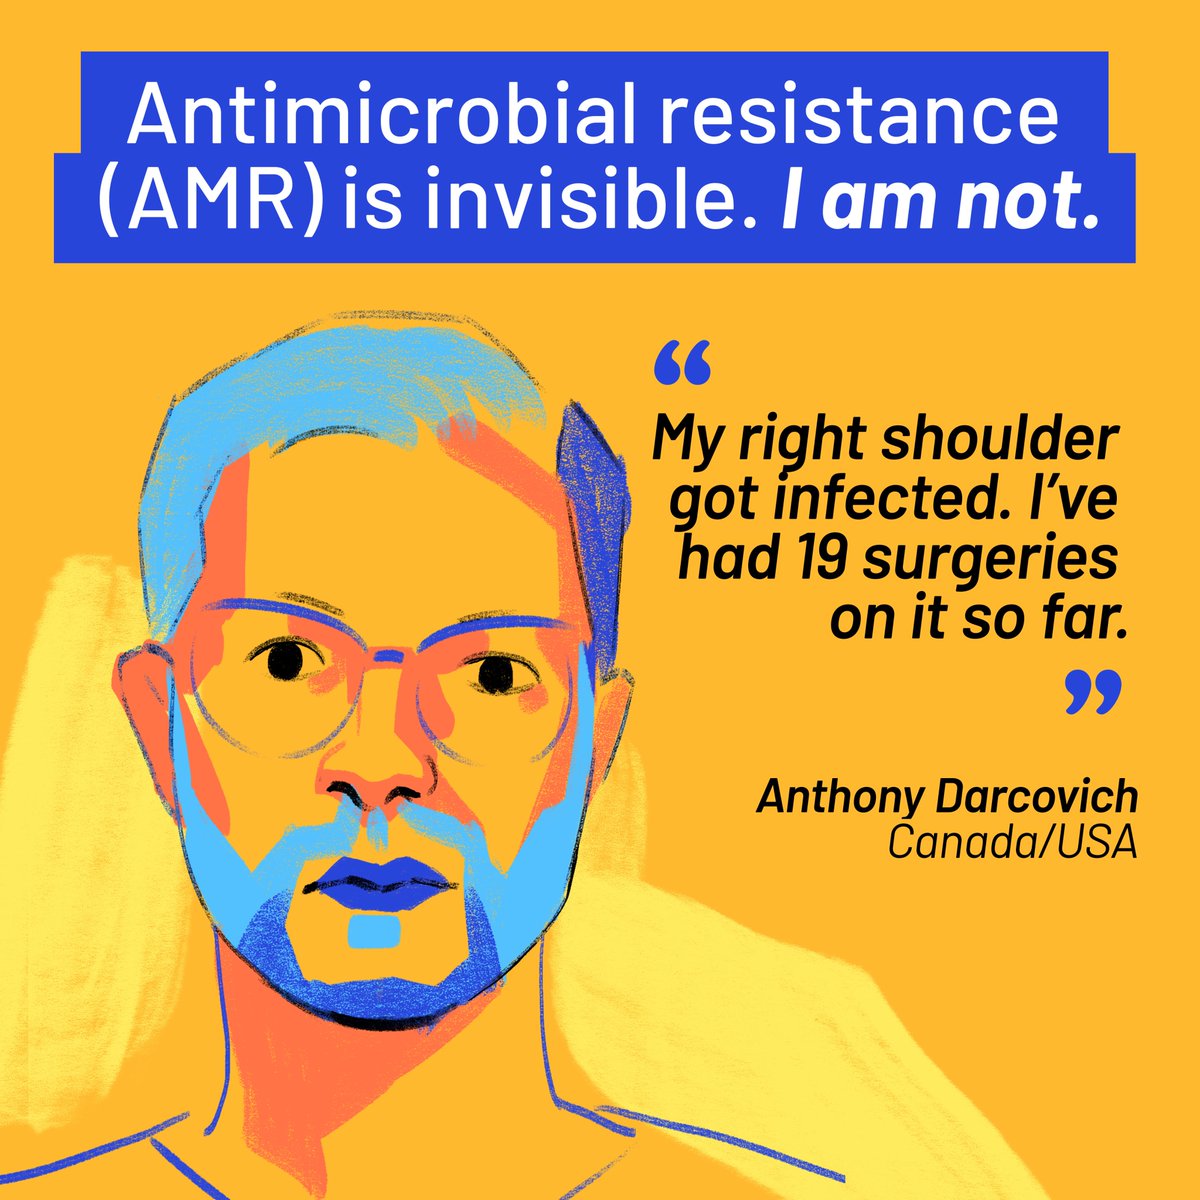 Speaking out against #AntimicrobialResistance or #AMR 👉Antimicrobial resistance is invisible, but its victims are not👈 1⃣2⃣ #AMRsurvivors & advocates share their stories, urging awareness and action to stop AMR in its tracks who.int/campaigns/worl… #HealthSecurity #SDGs